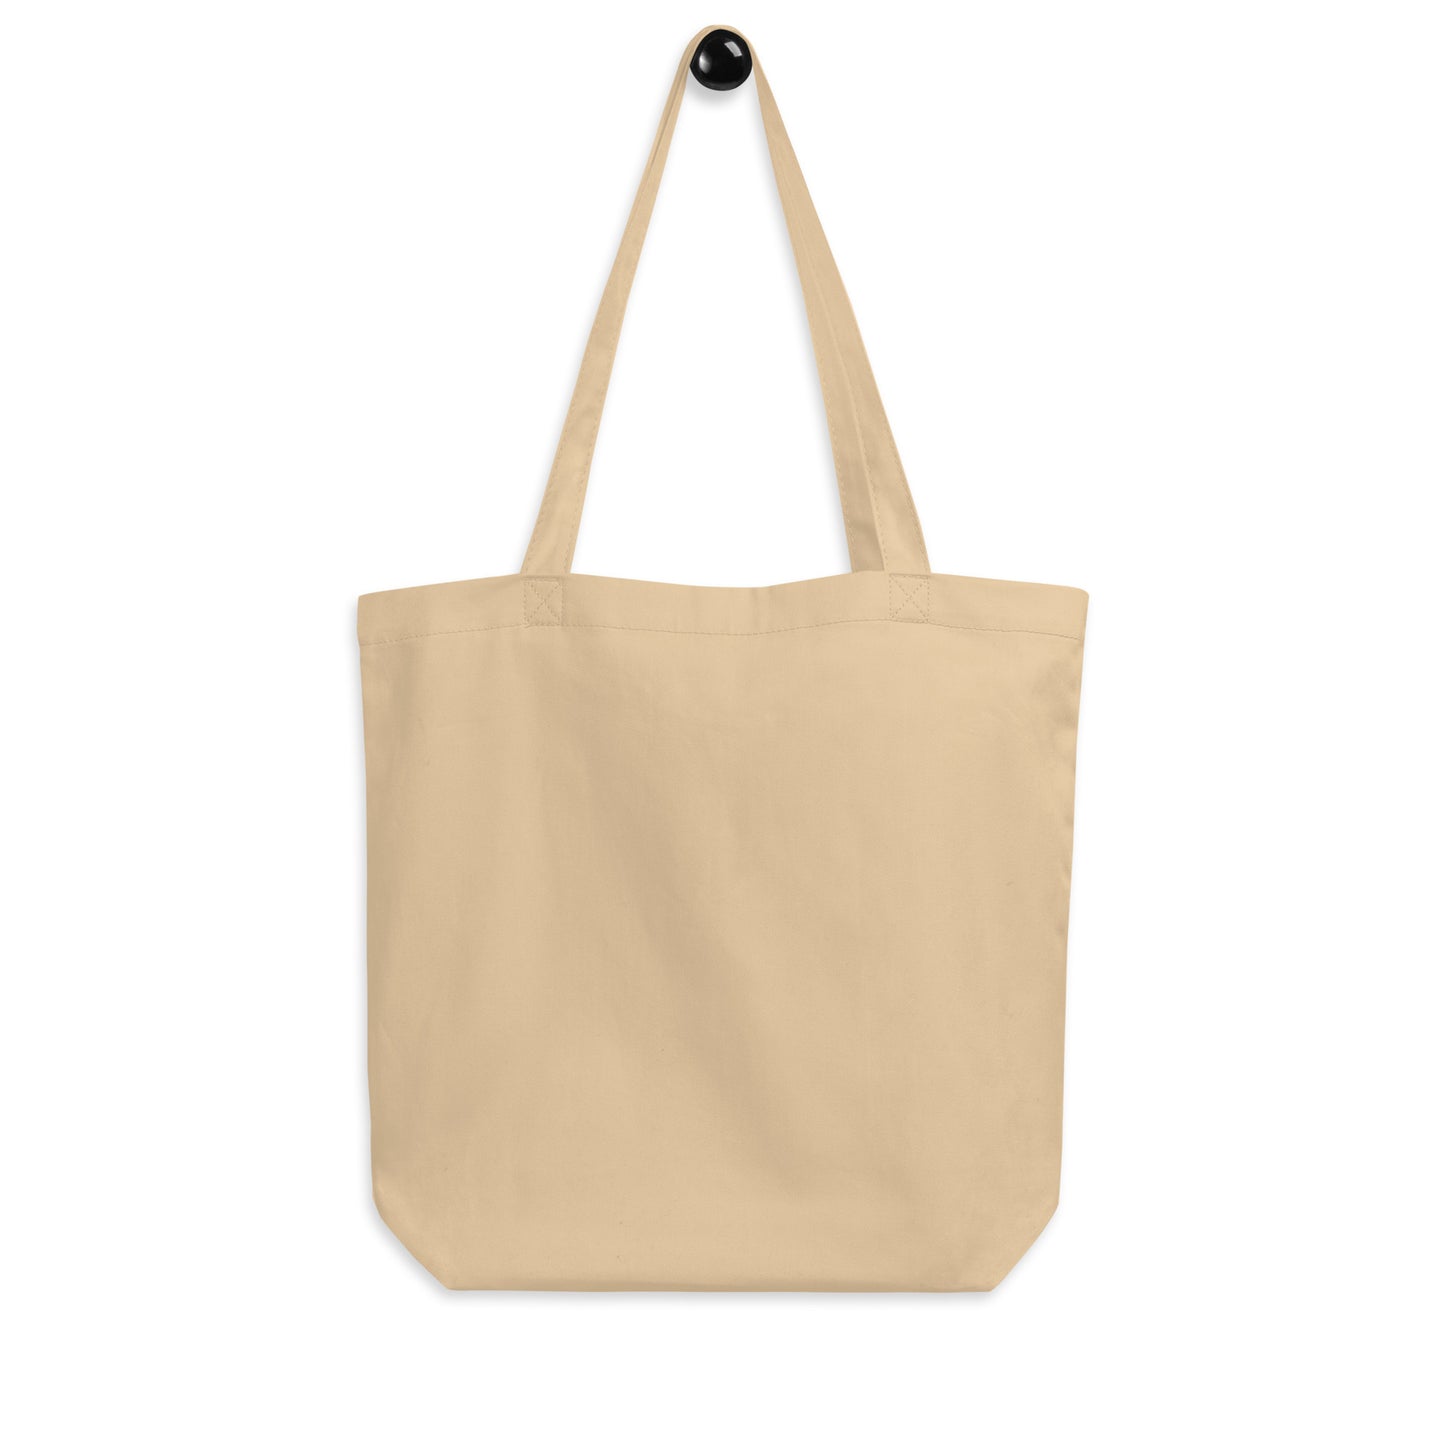 Cool Travel Gift Organic Tote Bag - Viking Blue • MSY New Orleans • YHM Designs - Image 05